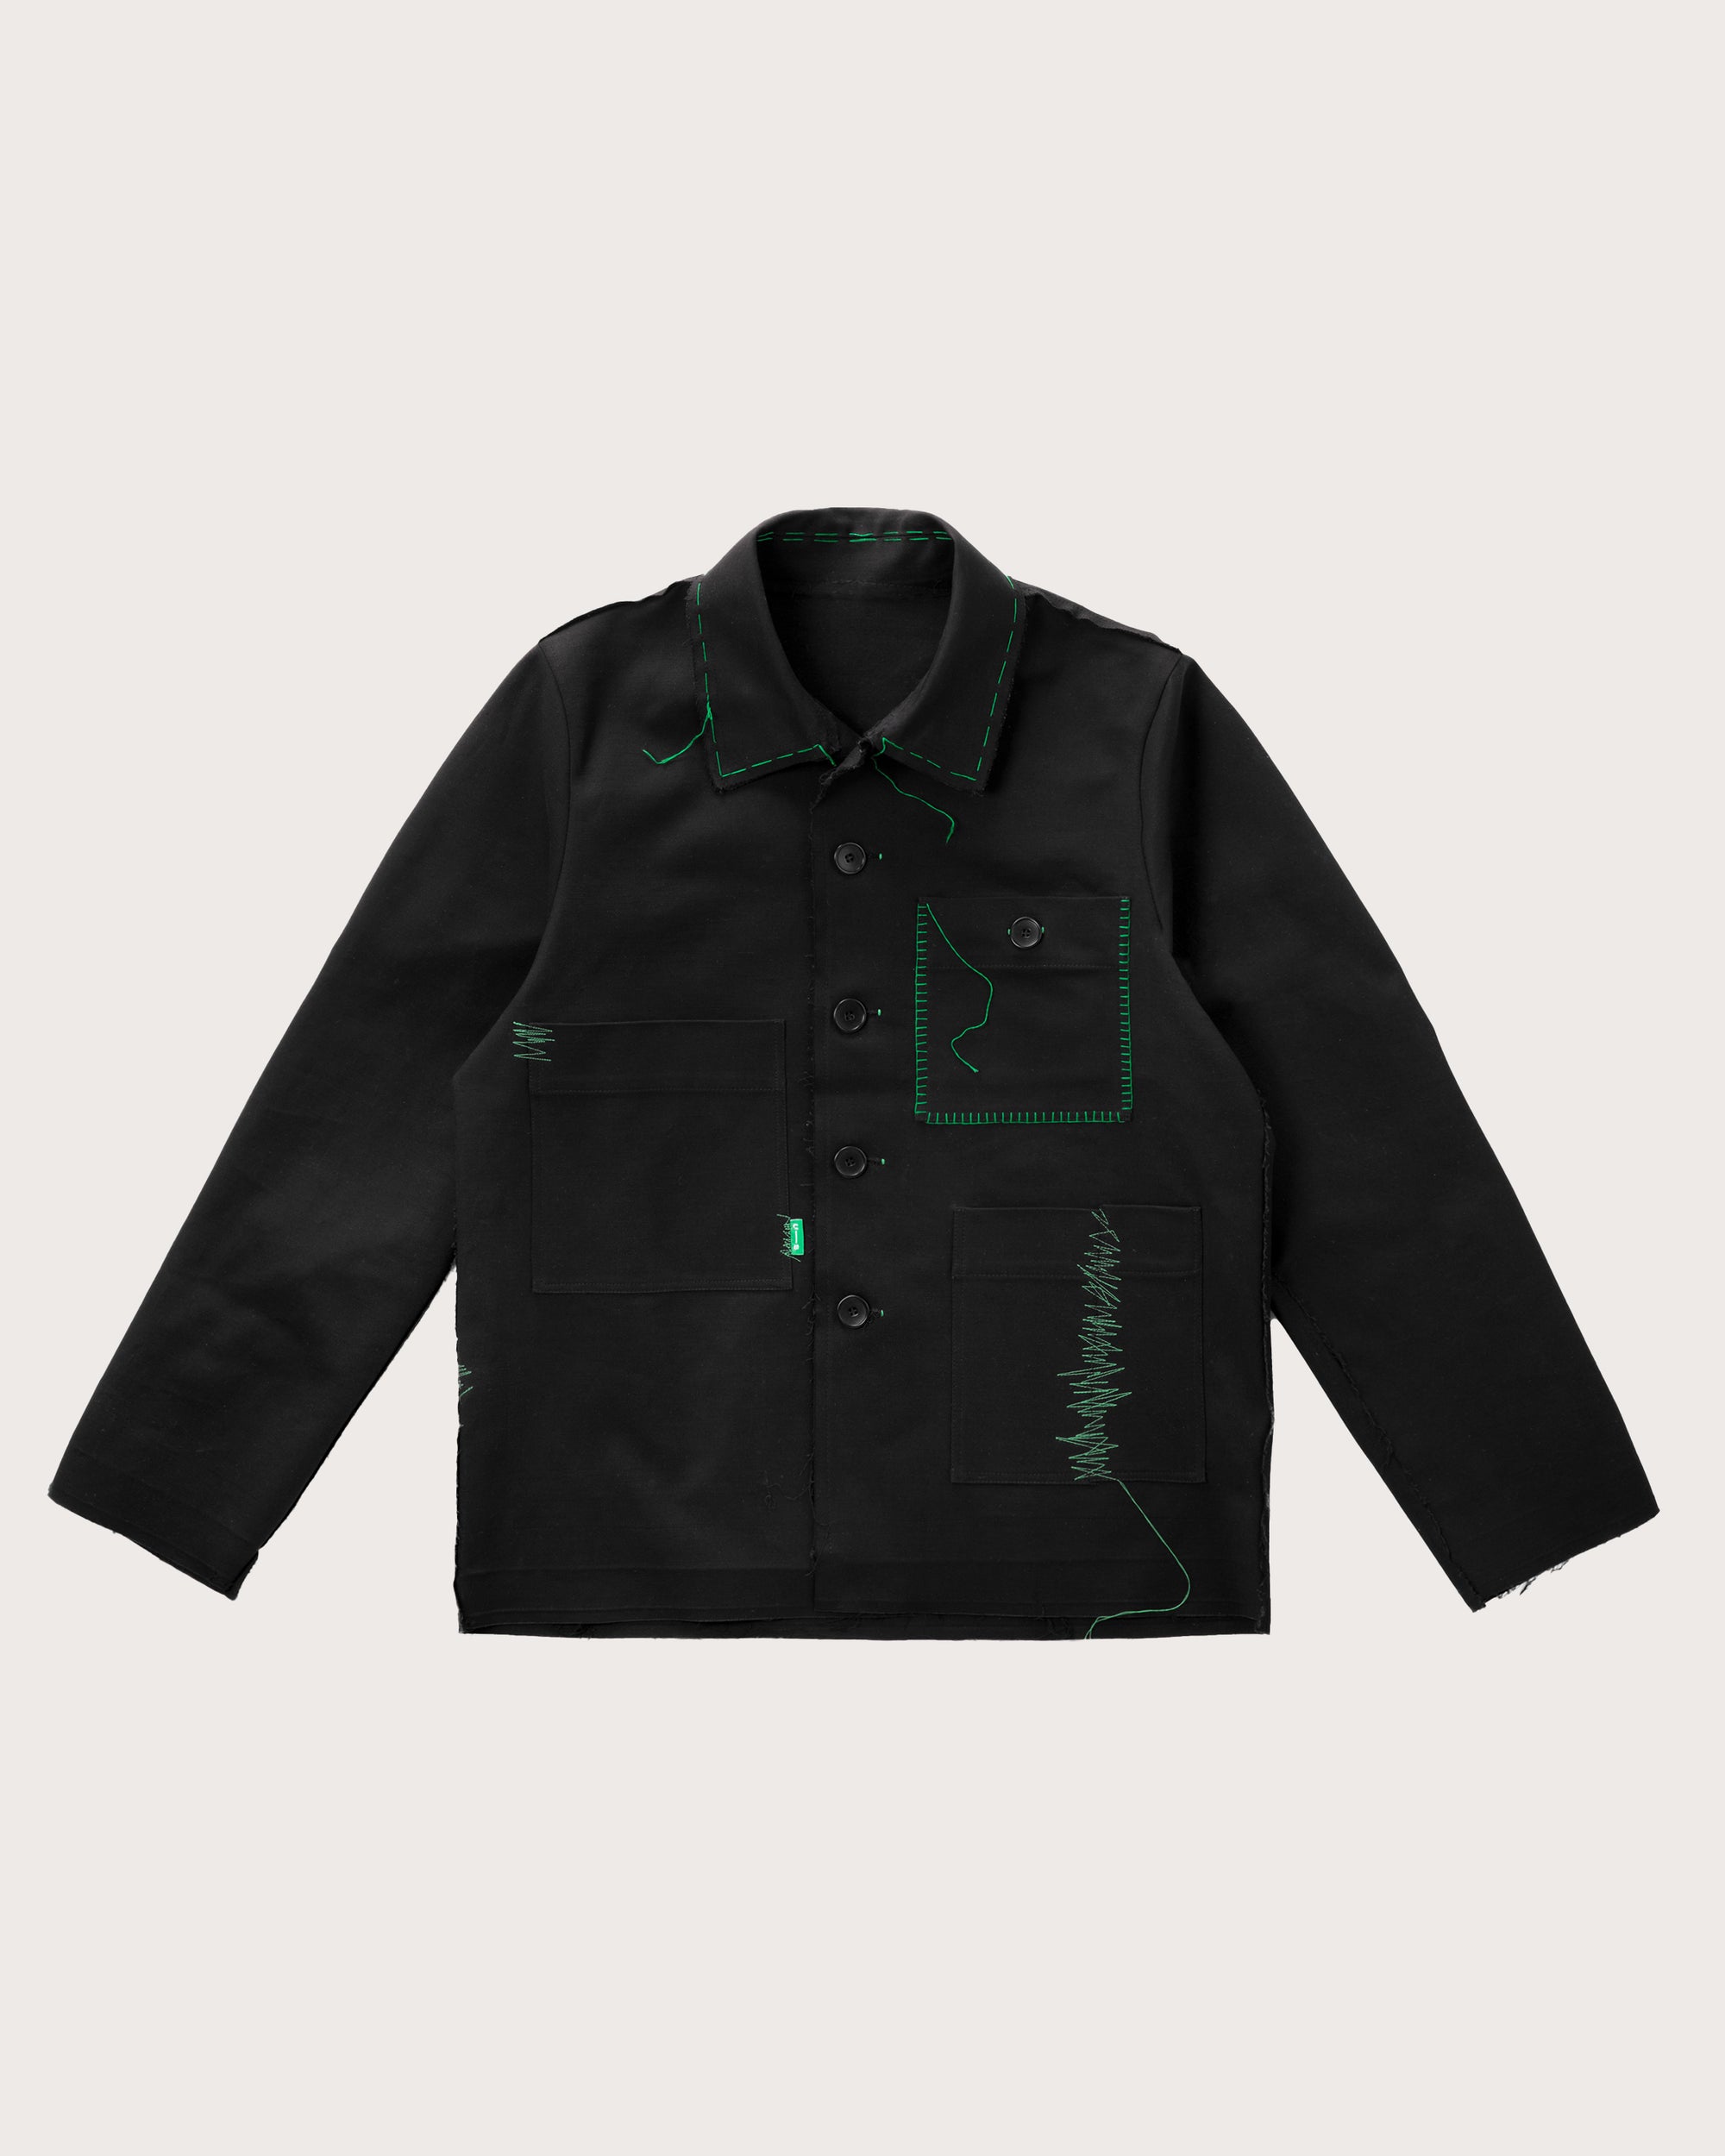 Disrupted Atelier Worker Jacket